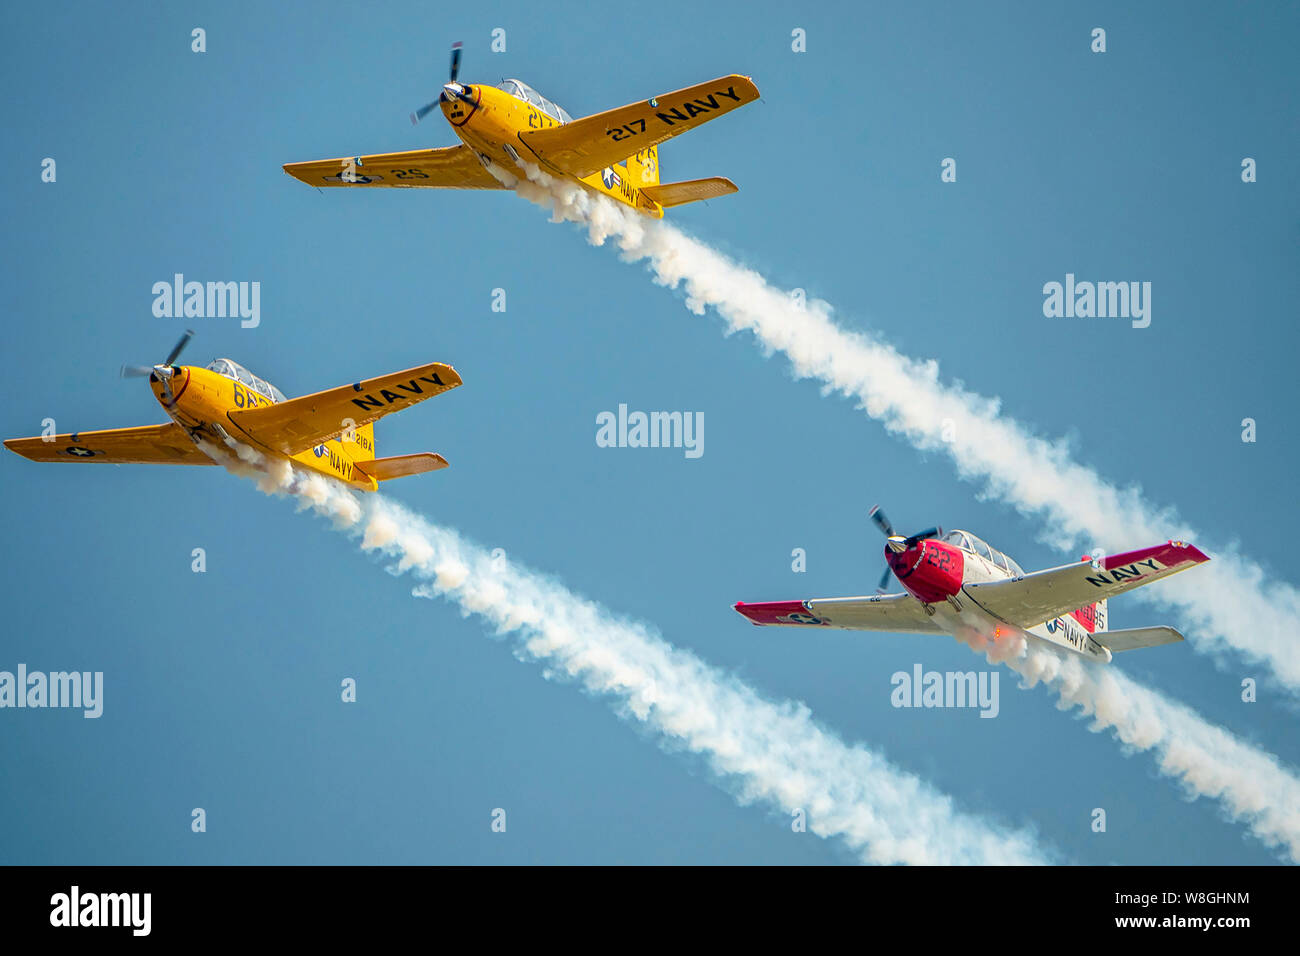 T-34 Mentors perform at the week-long AirVenture Oshkosh in Wisconsin, July 23, 2018. Stock Photo